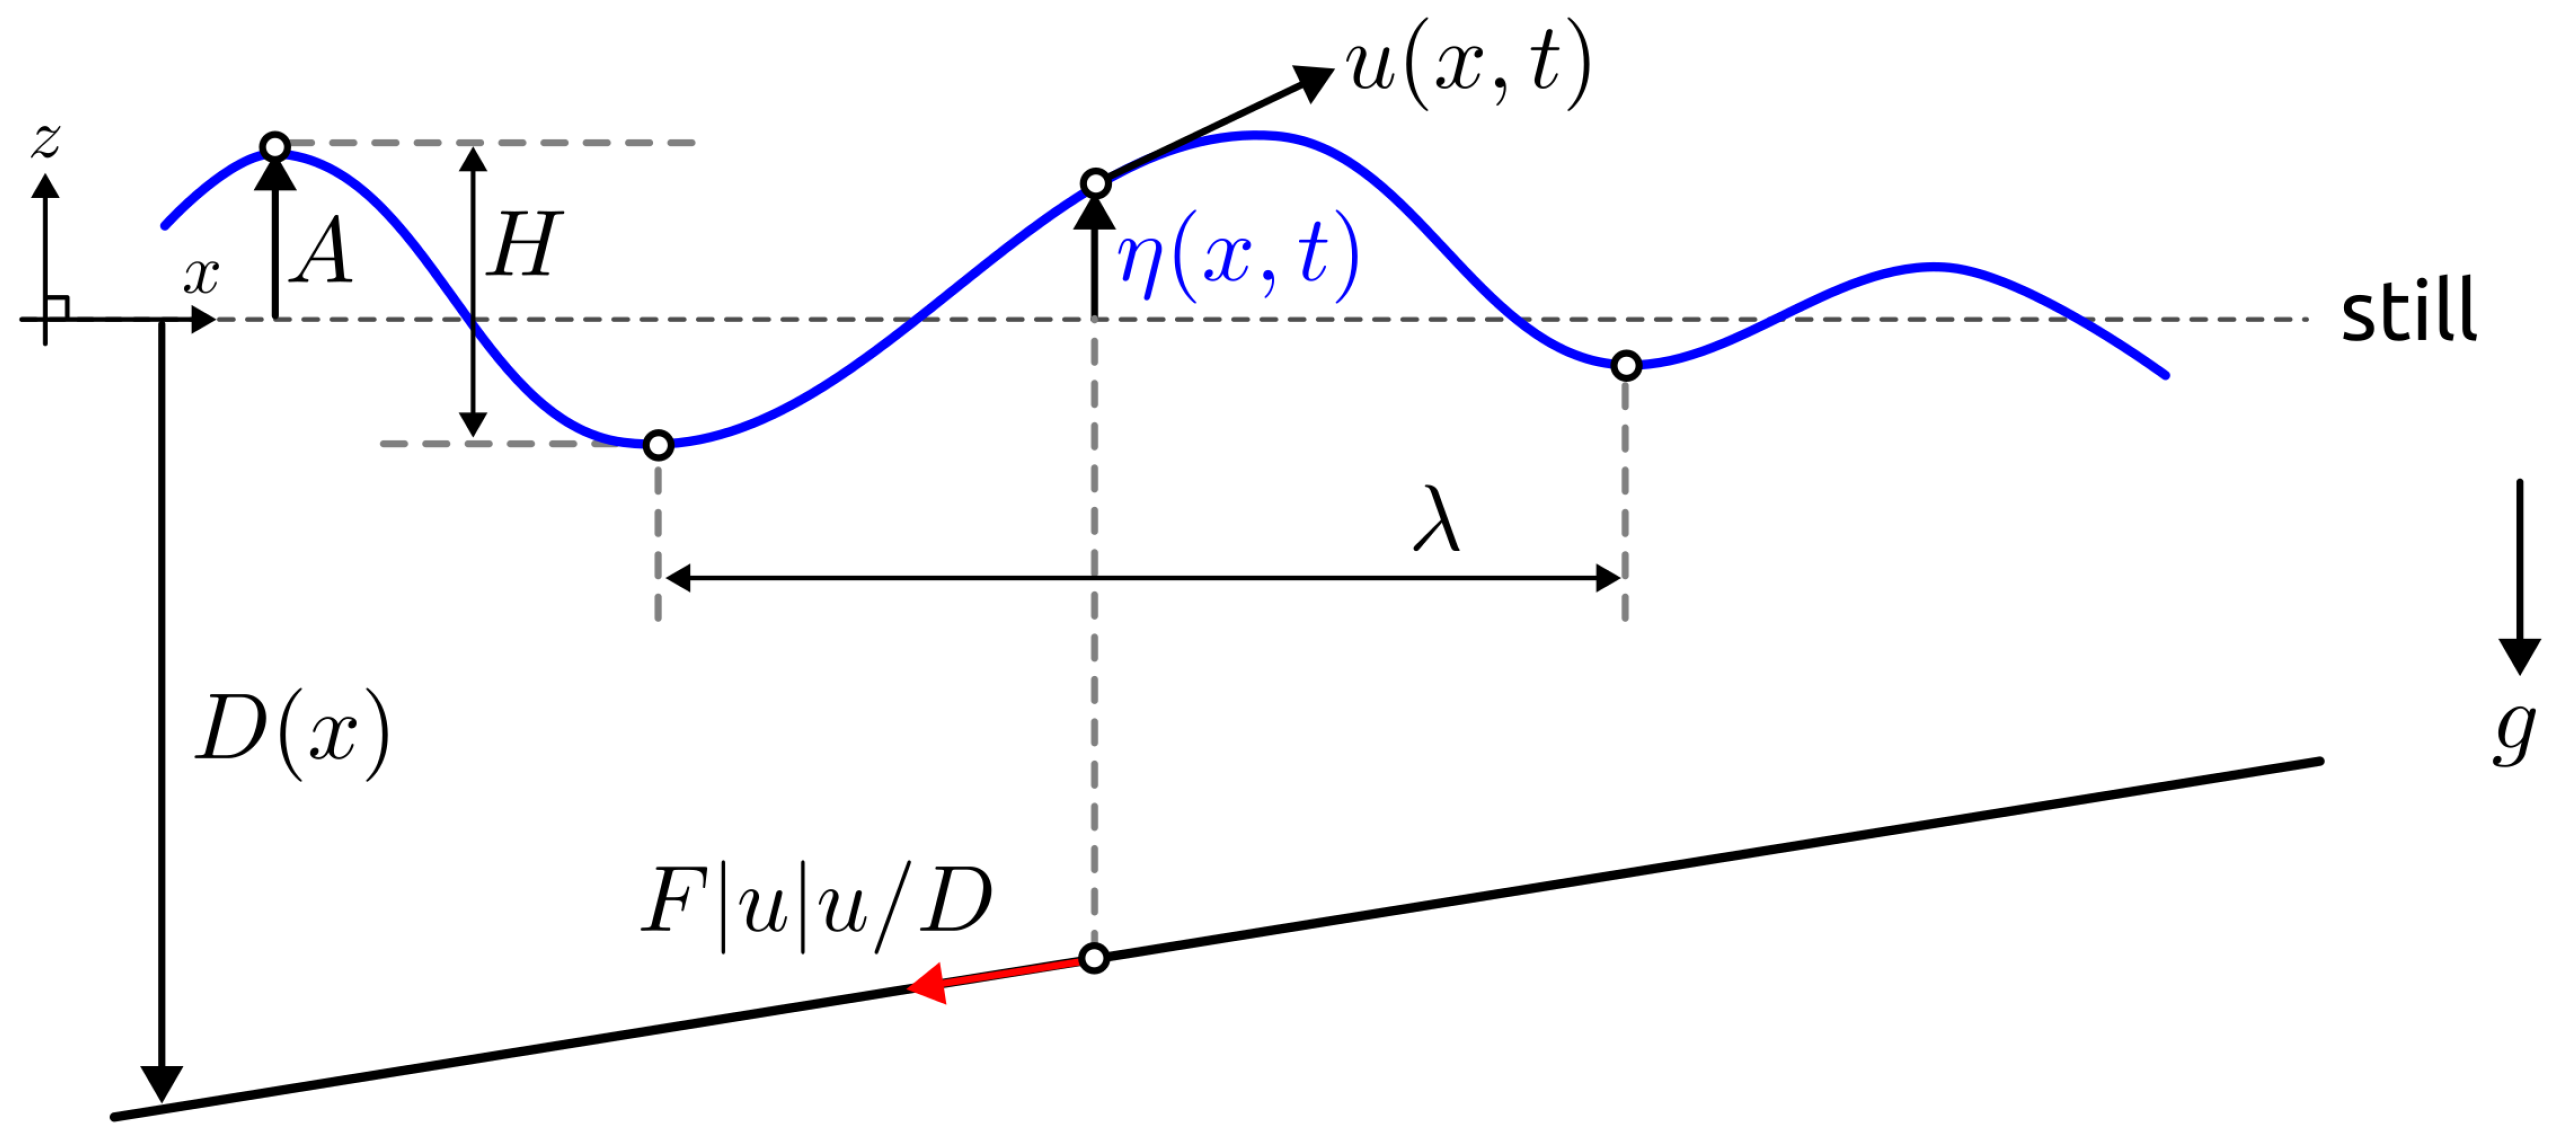 Illustration of the proposed wave isolation algorithm by rotation